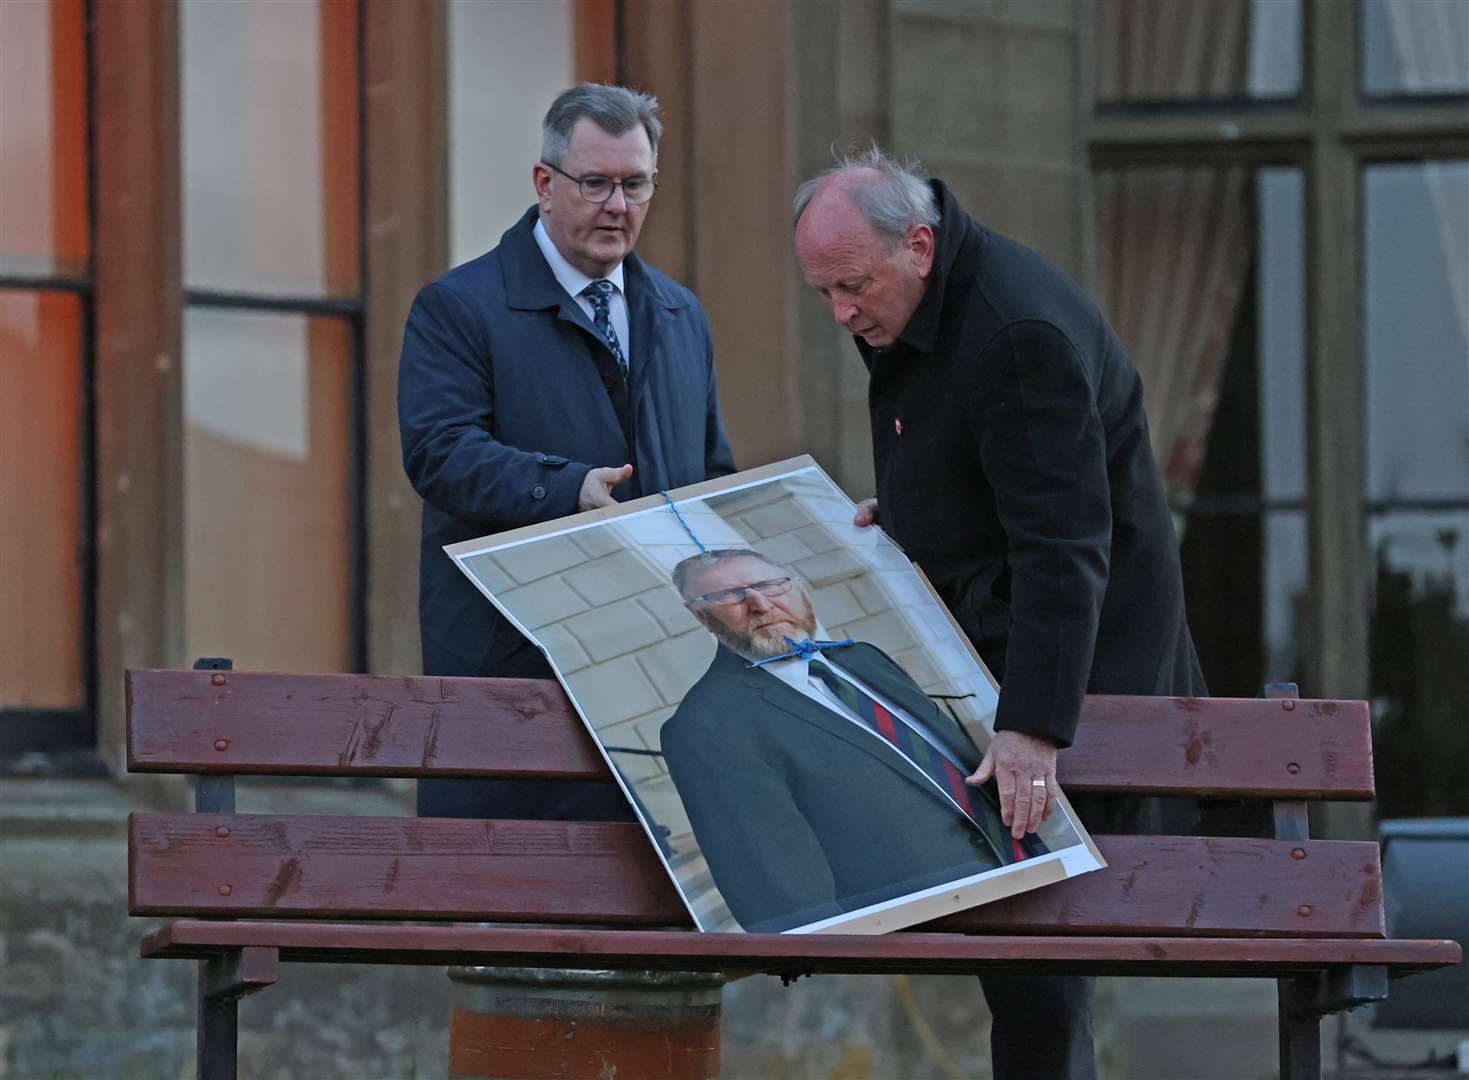 Jim Allister and DUP leader Sir Jeffrey Donaldson remove a poster of the leader of the Ulster Unionist Party, Doug Beattie, with a noose at a rally in Lurgan in April 2022 (Liam McBurney/PA)